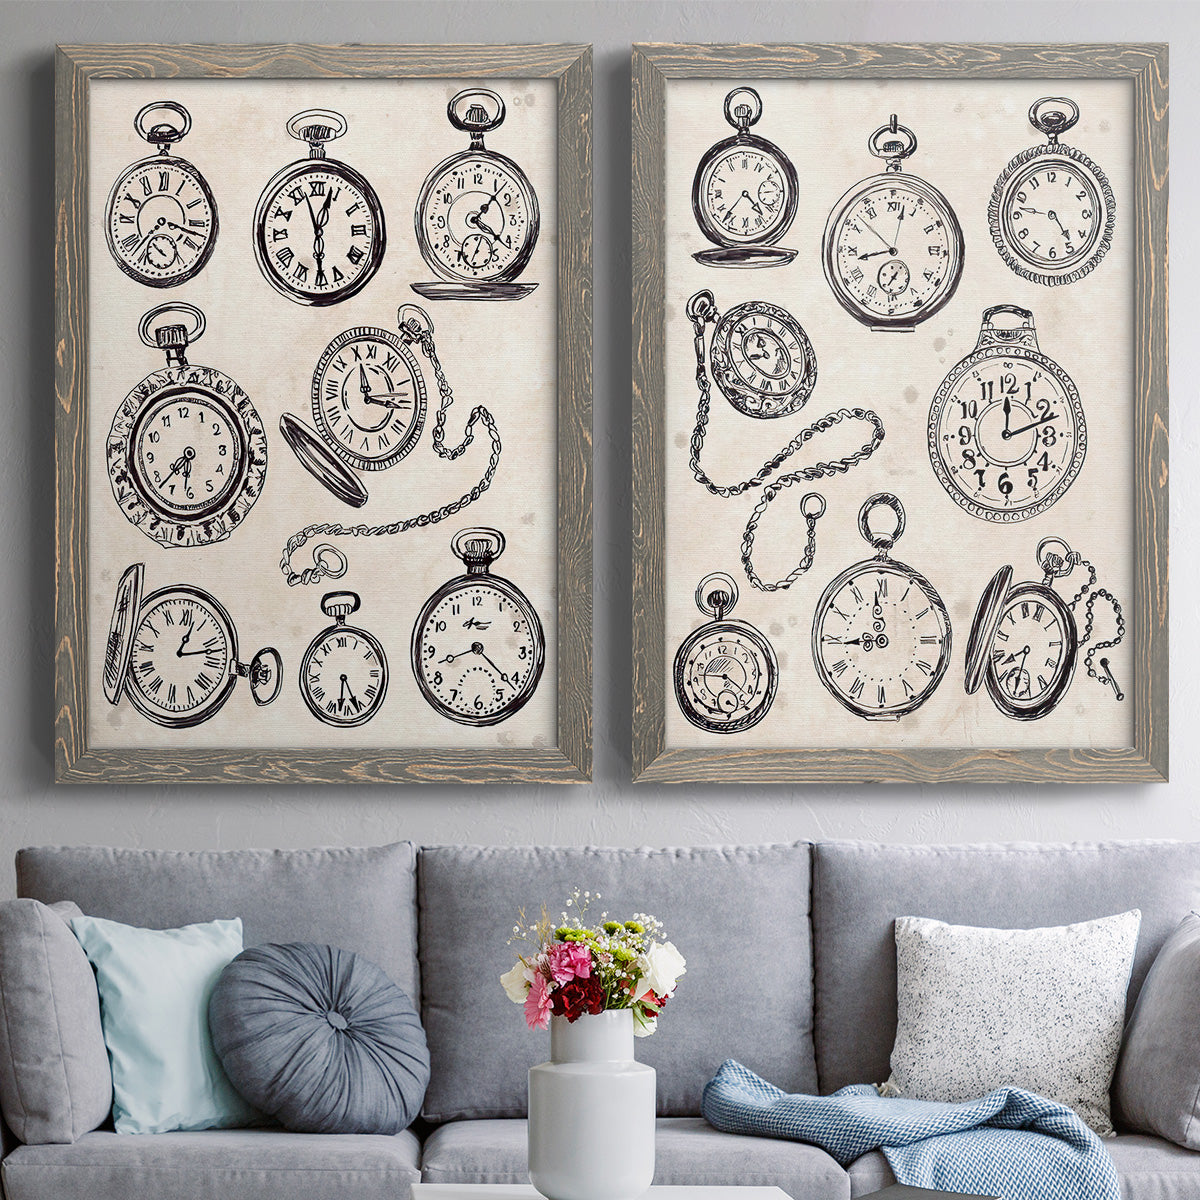 Pocket Watch Sketches I - Premium Framed Canvas 2 Piece Set - Ready to Hang